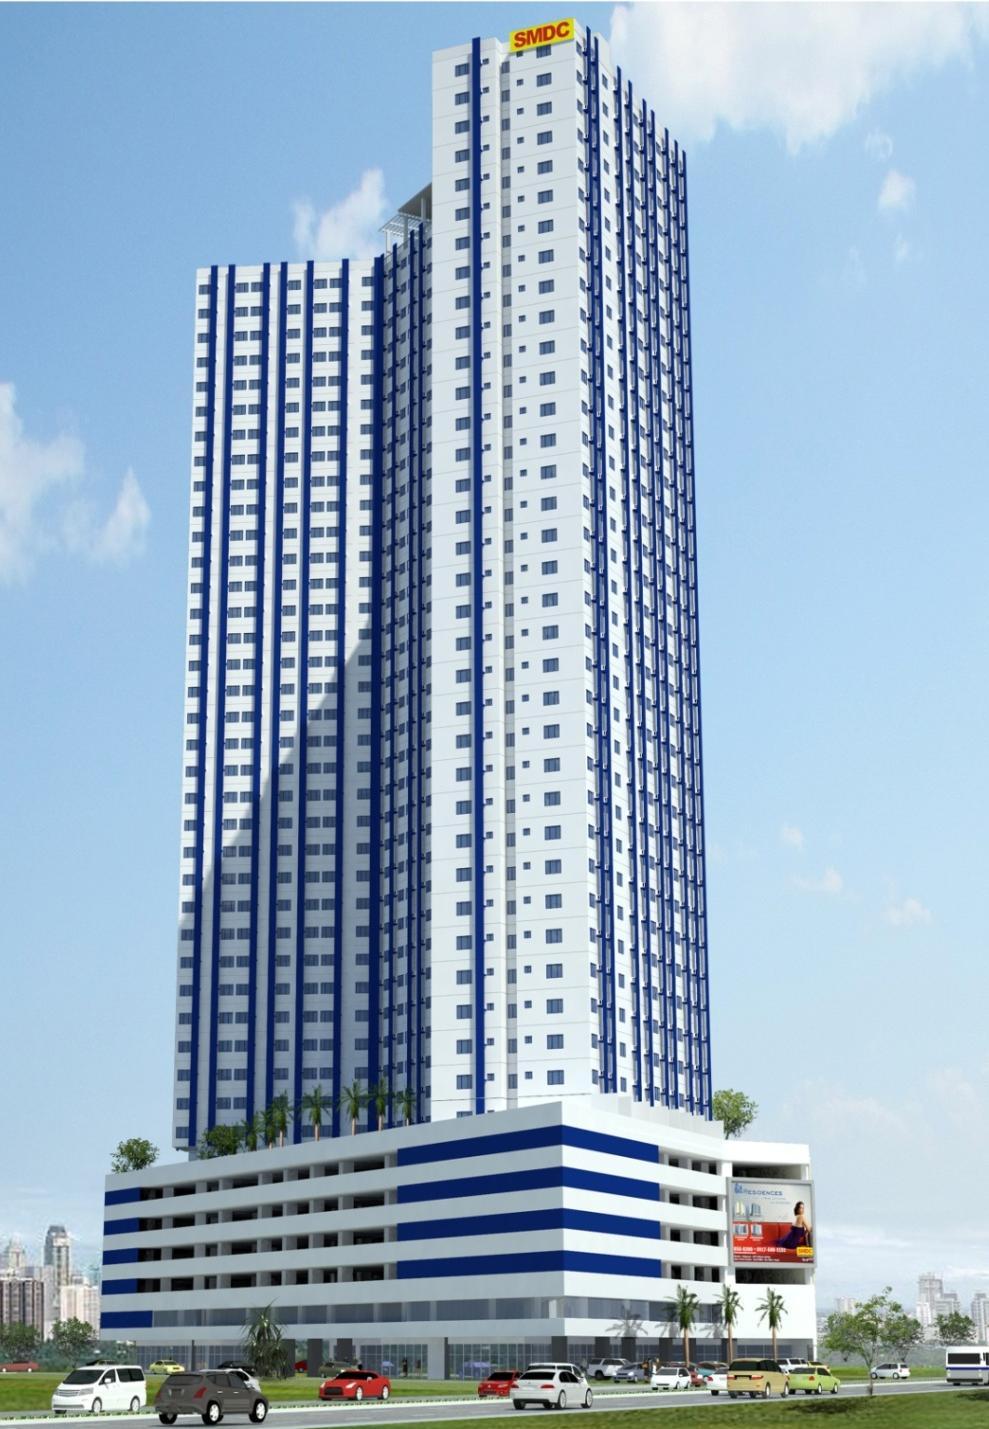 BLUE RESIDENCES A 40-Storey Residential Condominium located at Katipunan Avenue and Aurora Boulevard, Quezon City with: 1,591 Residential Units from the 7 th to the 41 st Floor - Studio, 1 Bedroom